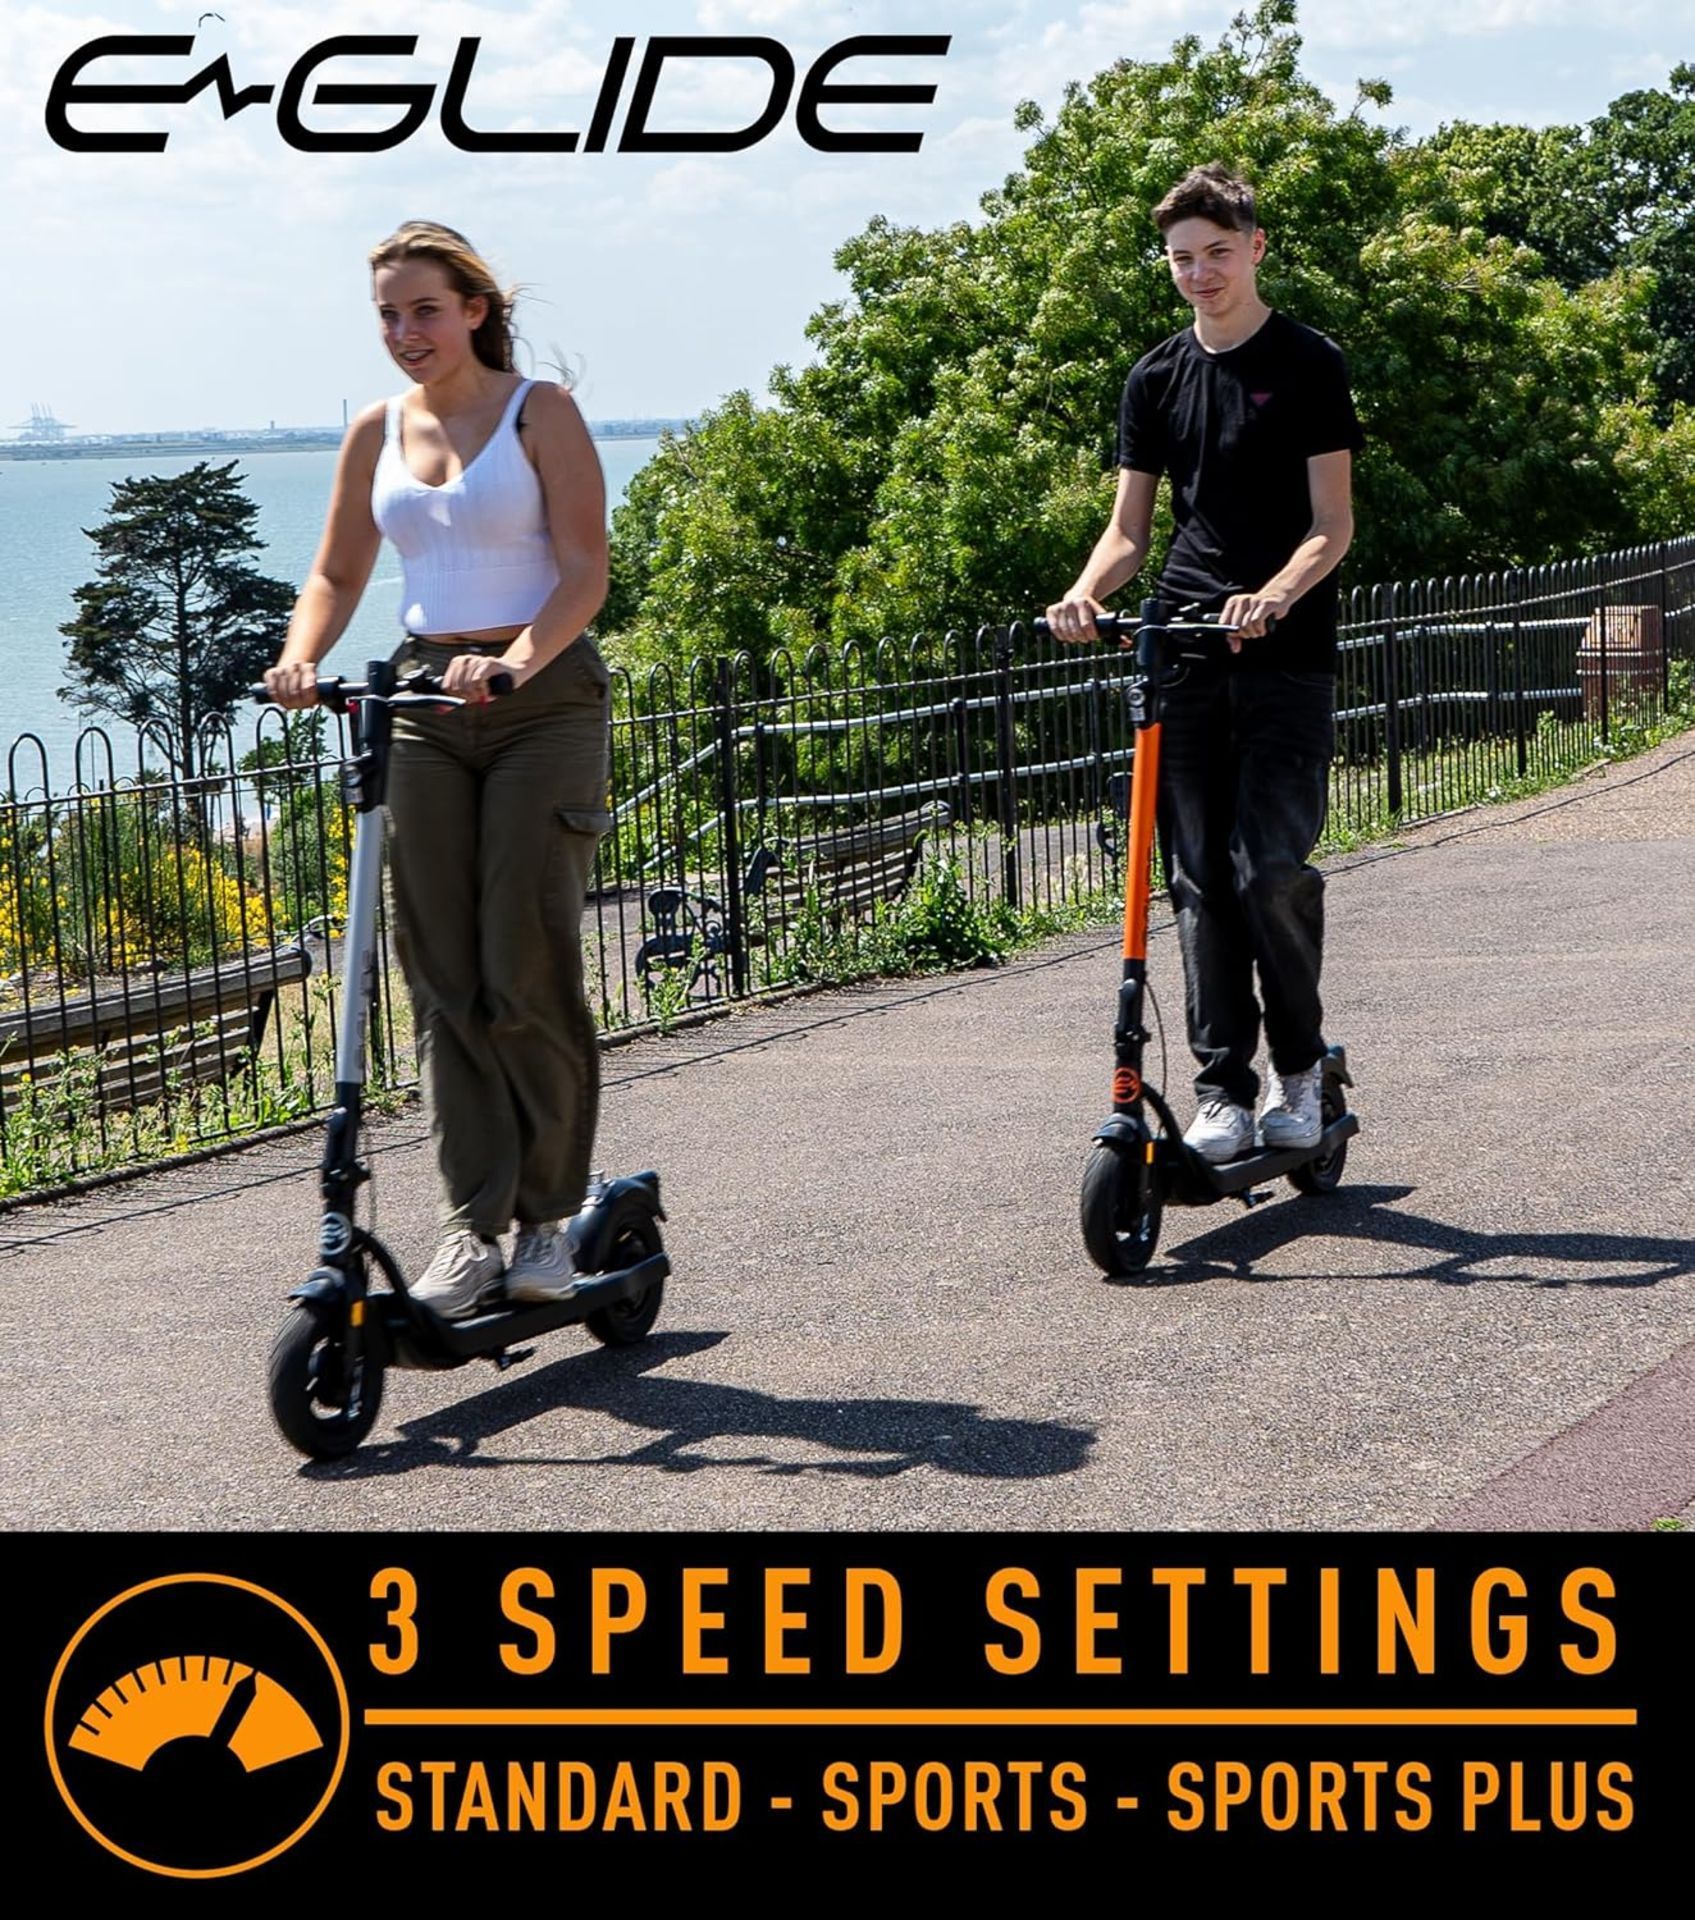 Brand New E-Glide V2 Electric Scooter Orange and Black RRP £599, Introducing a sleek and efficient - Image 4 of 4